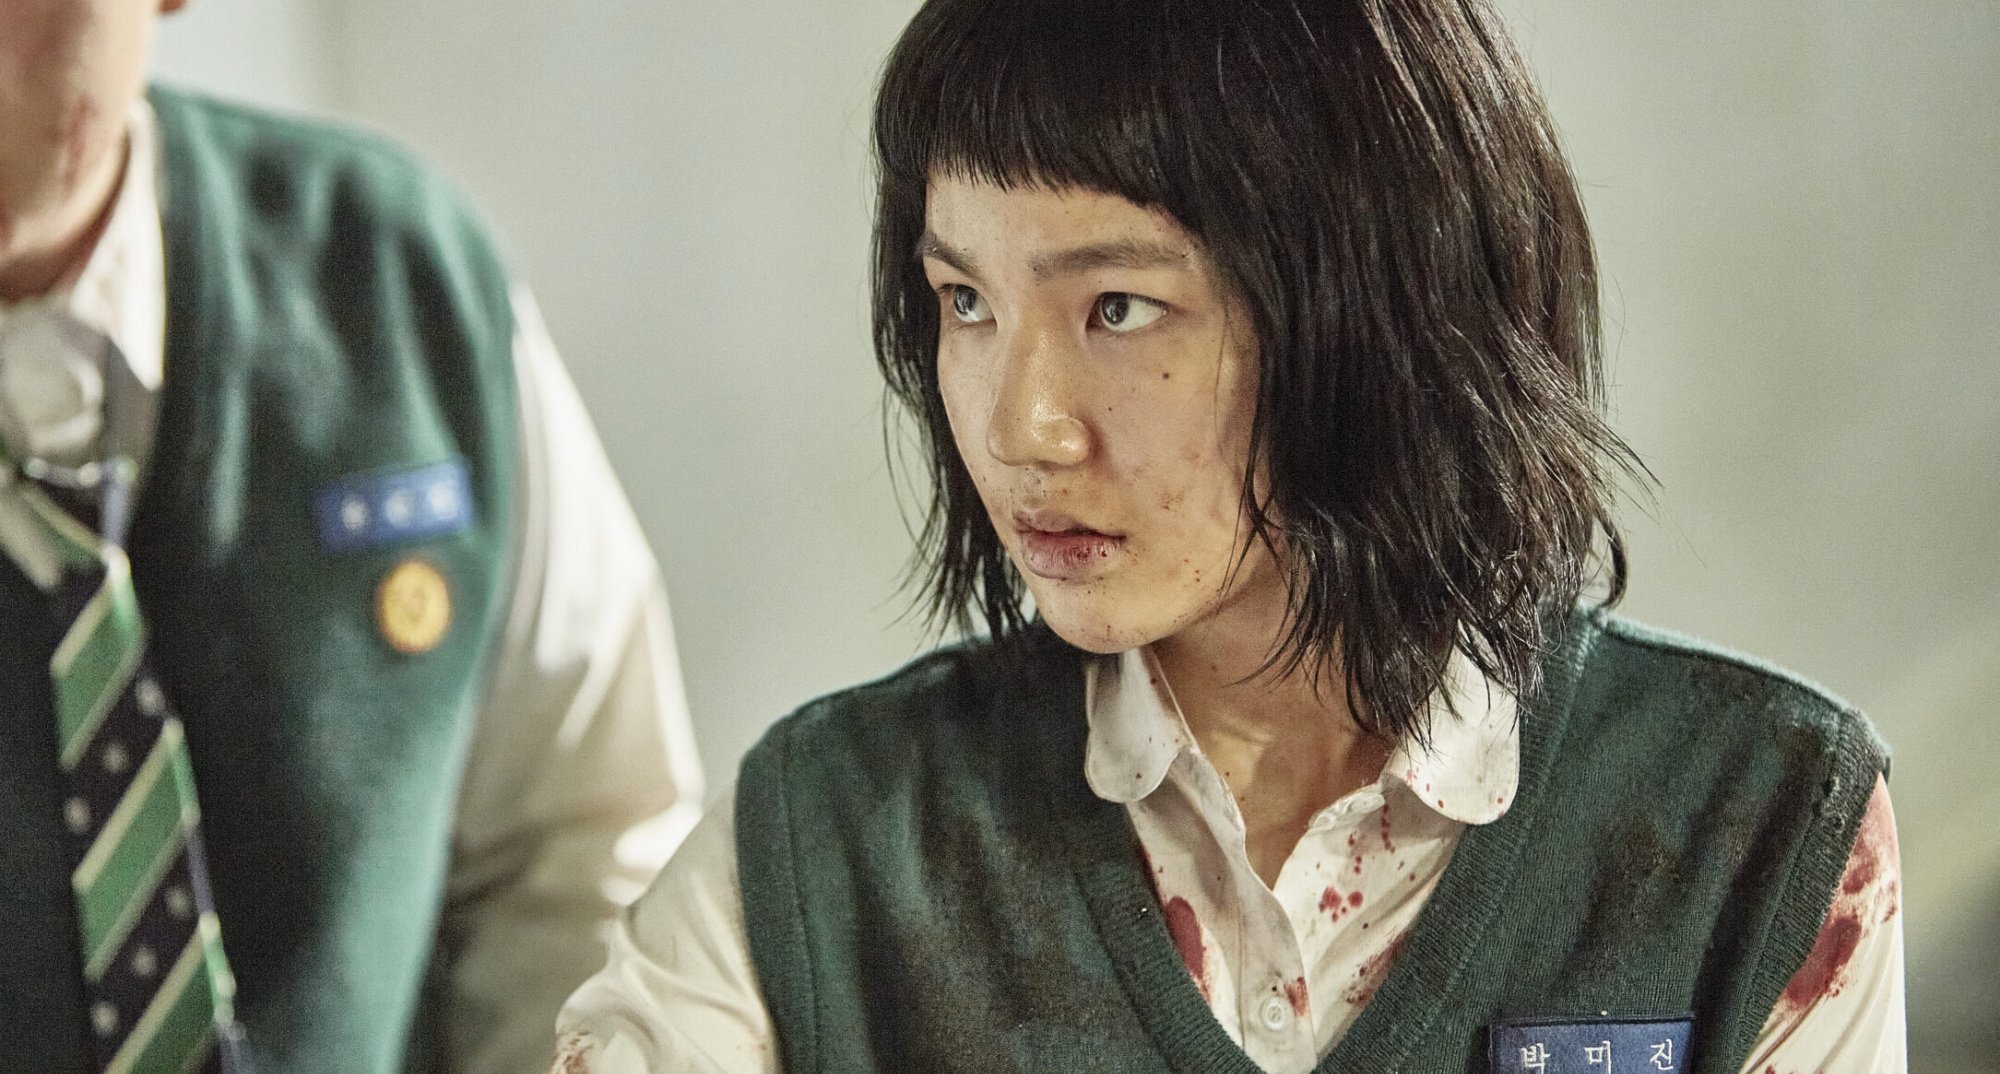 Lee Eun-saem as Mi-jin in 'All of Us Are Dead' wearing school uniform and covered in blood.